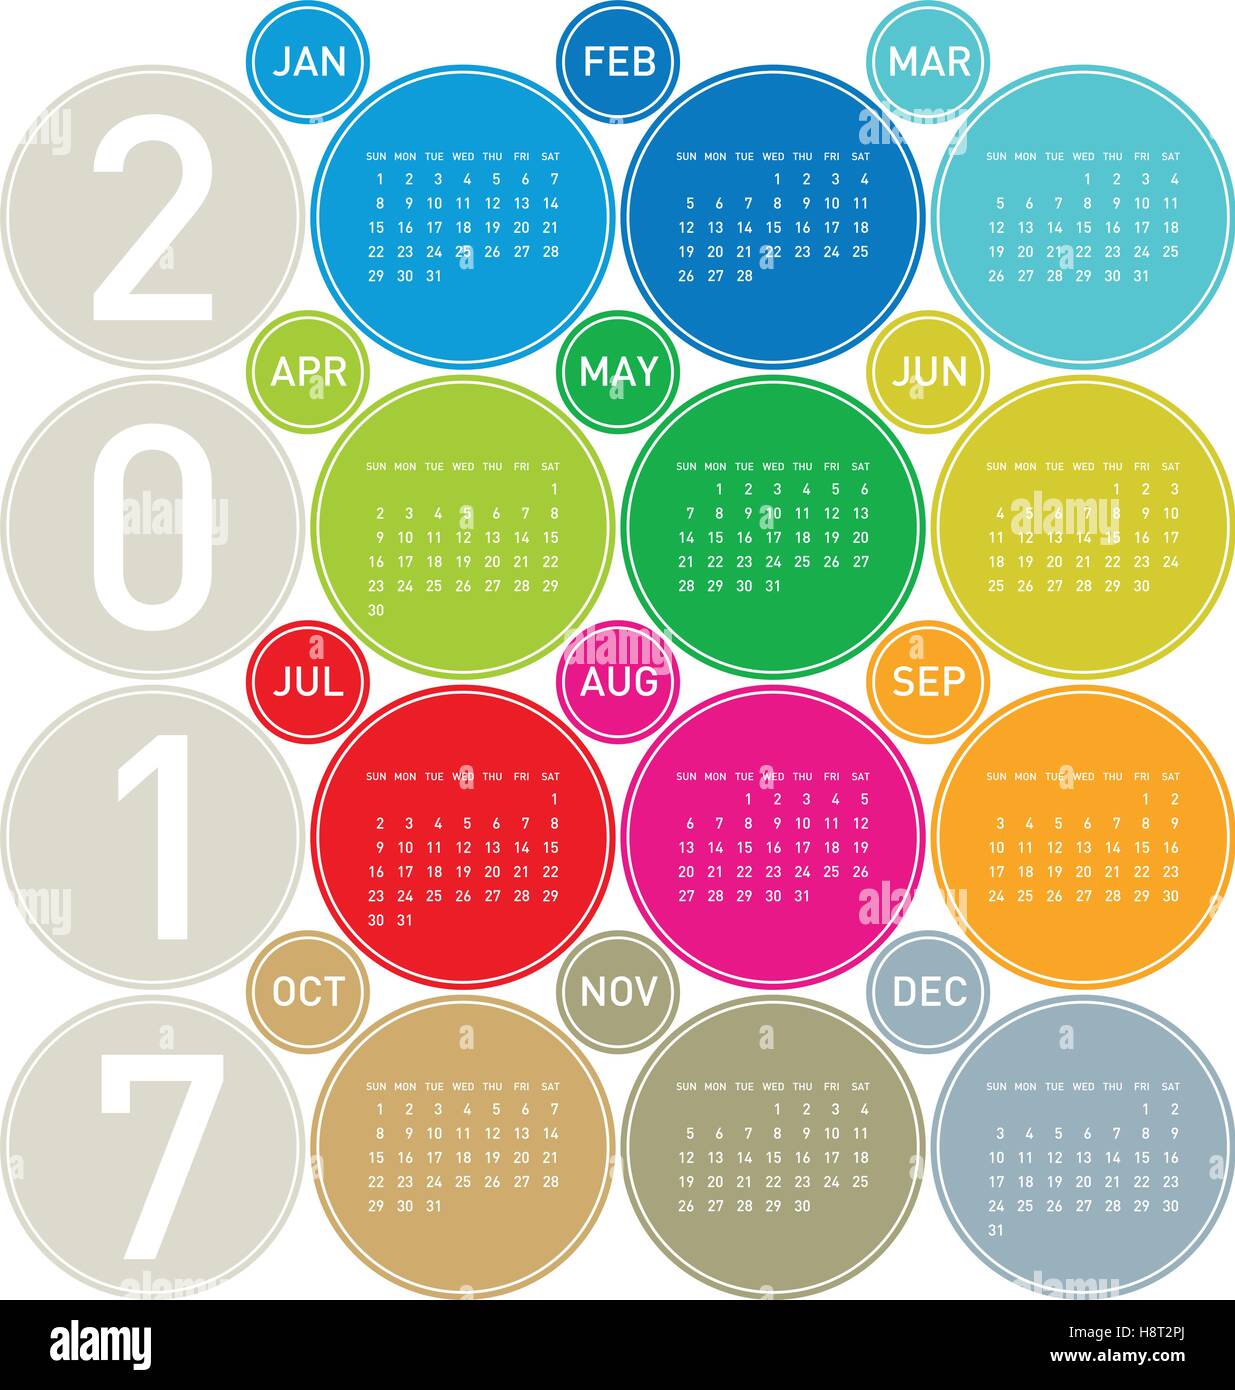 Colorful Calendar for year 2017 in a circles theme, in vector format. Stock Vector